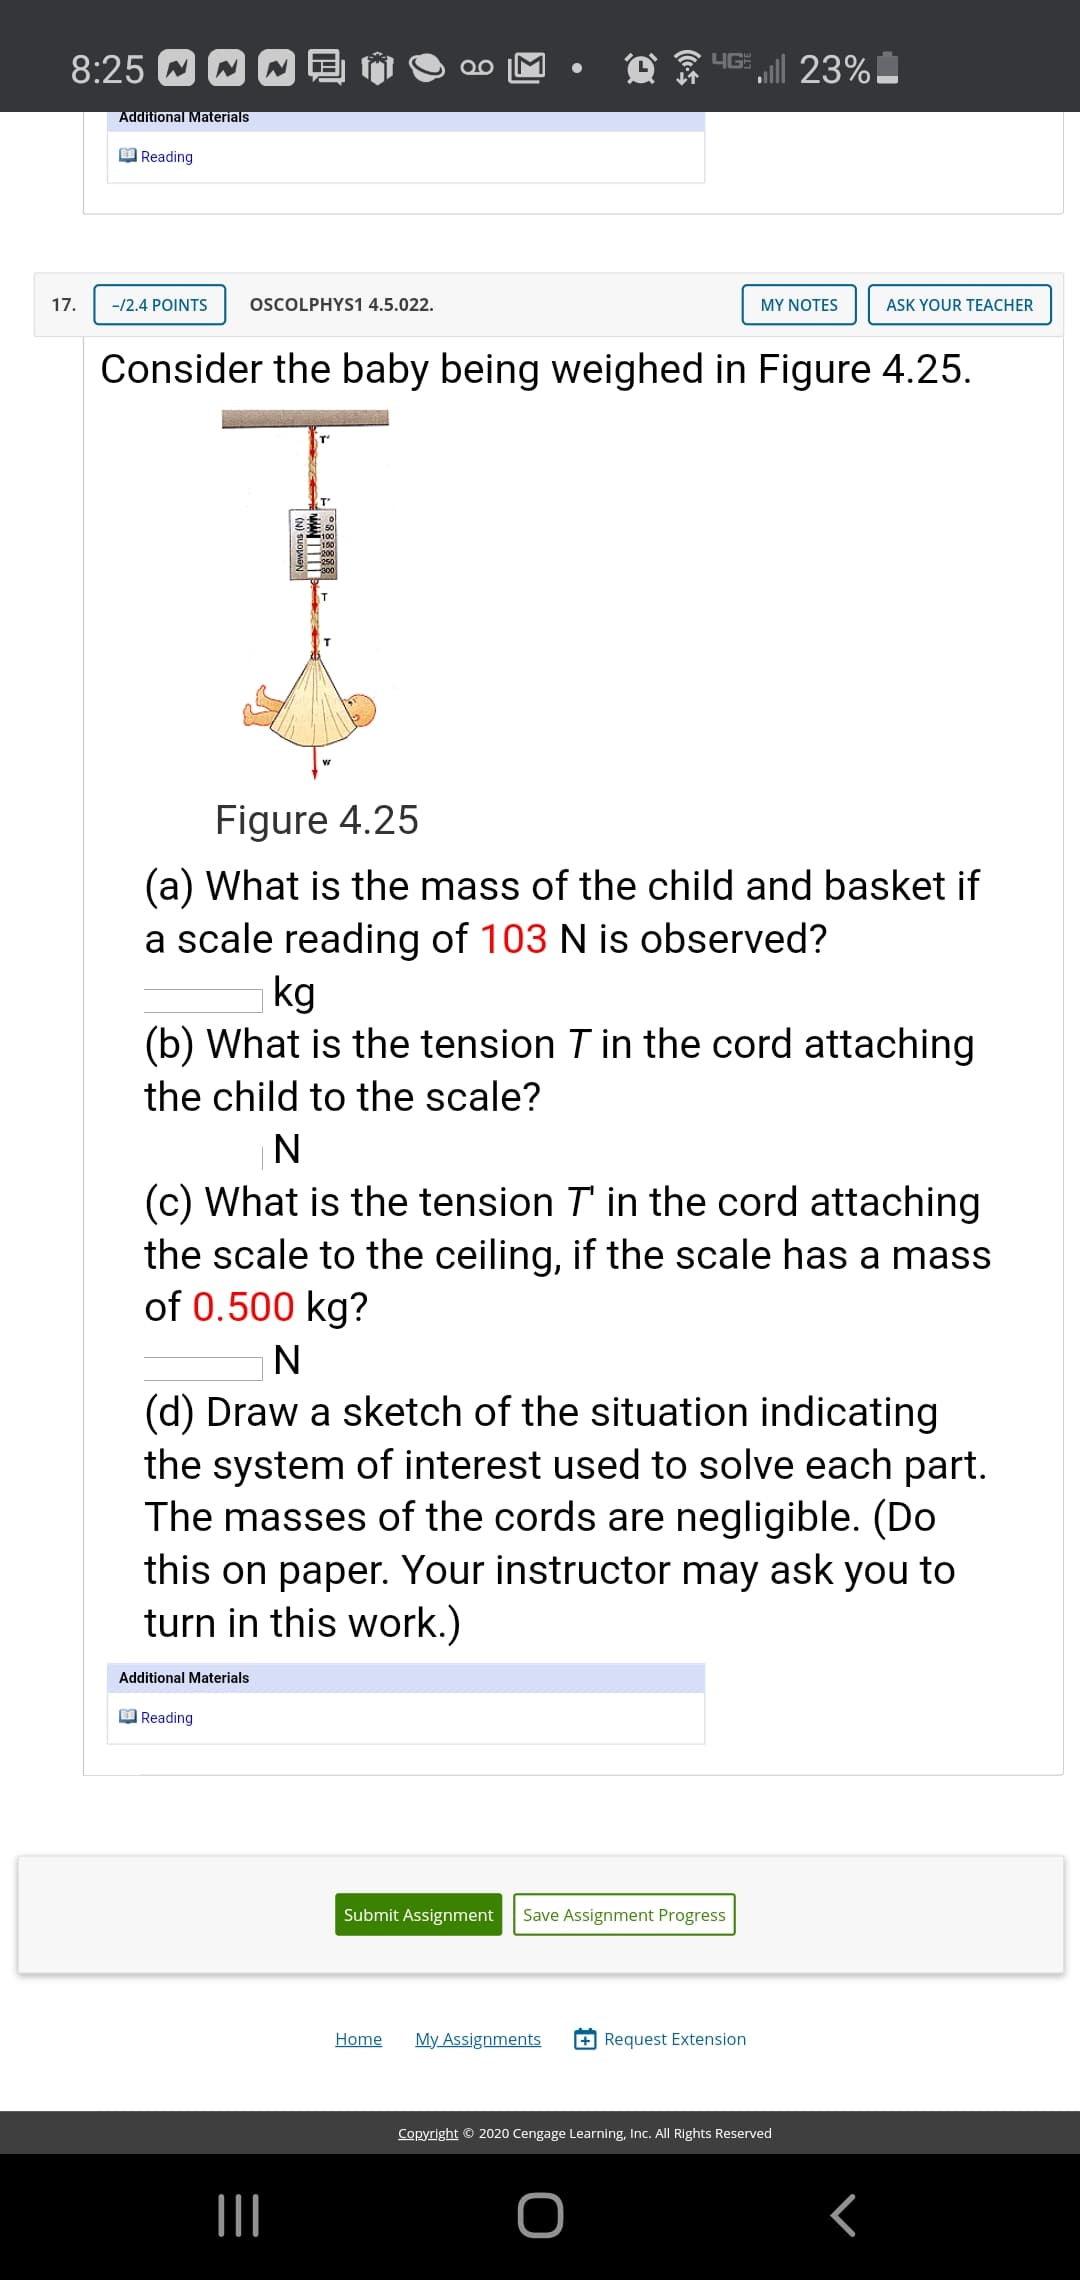 Consider the baby being weighed in Figure 4.25.
Figure 4.25
(a) What is the mass of the child and basket if
a scale reading of 103 N is observed?
kg
(b) What is the tension T in the cord attaching
the child to the scale?
N
(c) What is the tension T' in the cord attaching
the scale to the ceiling, if the scale has a mass
of 0.500 kg?
